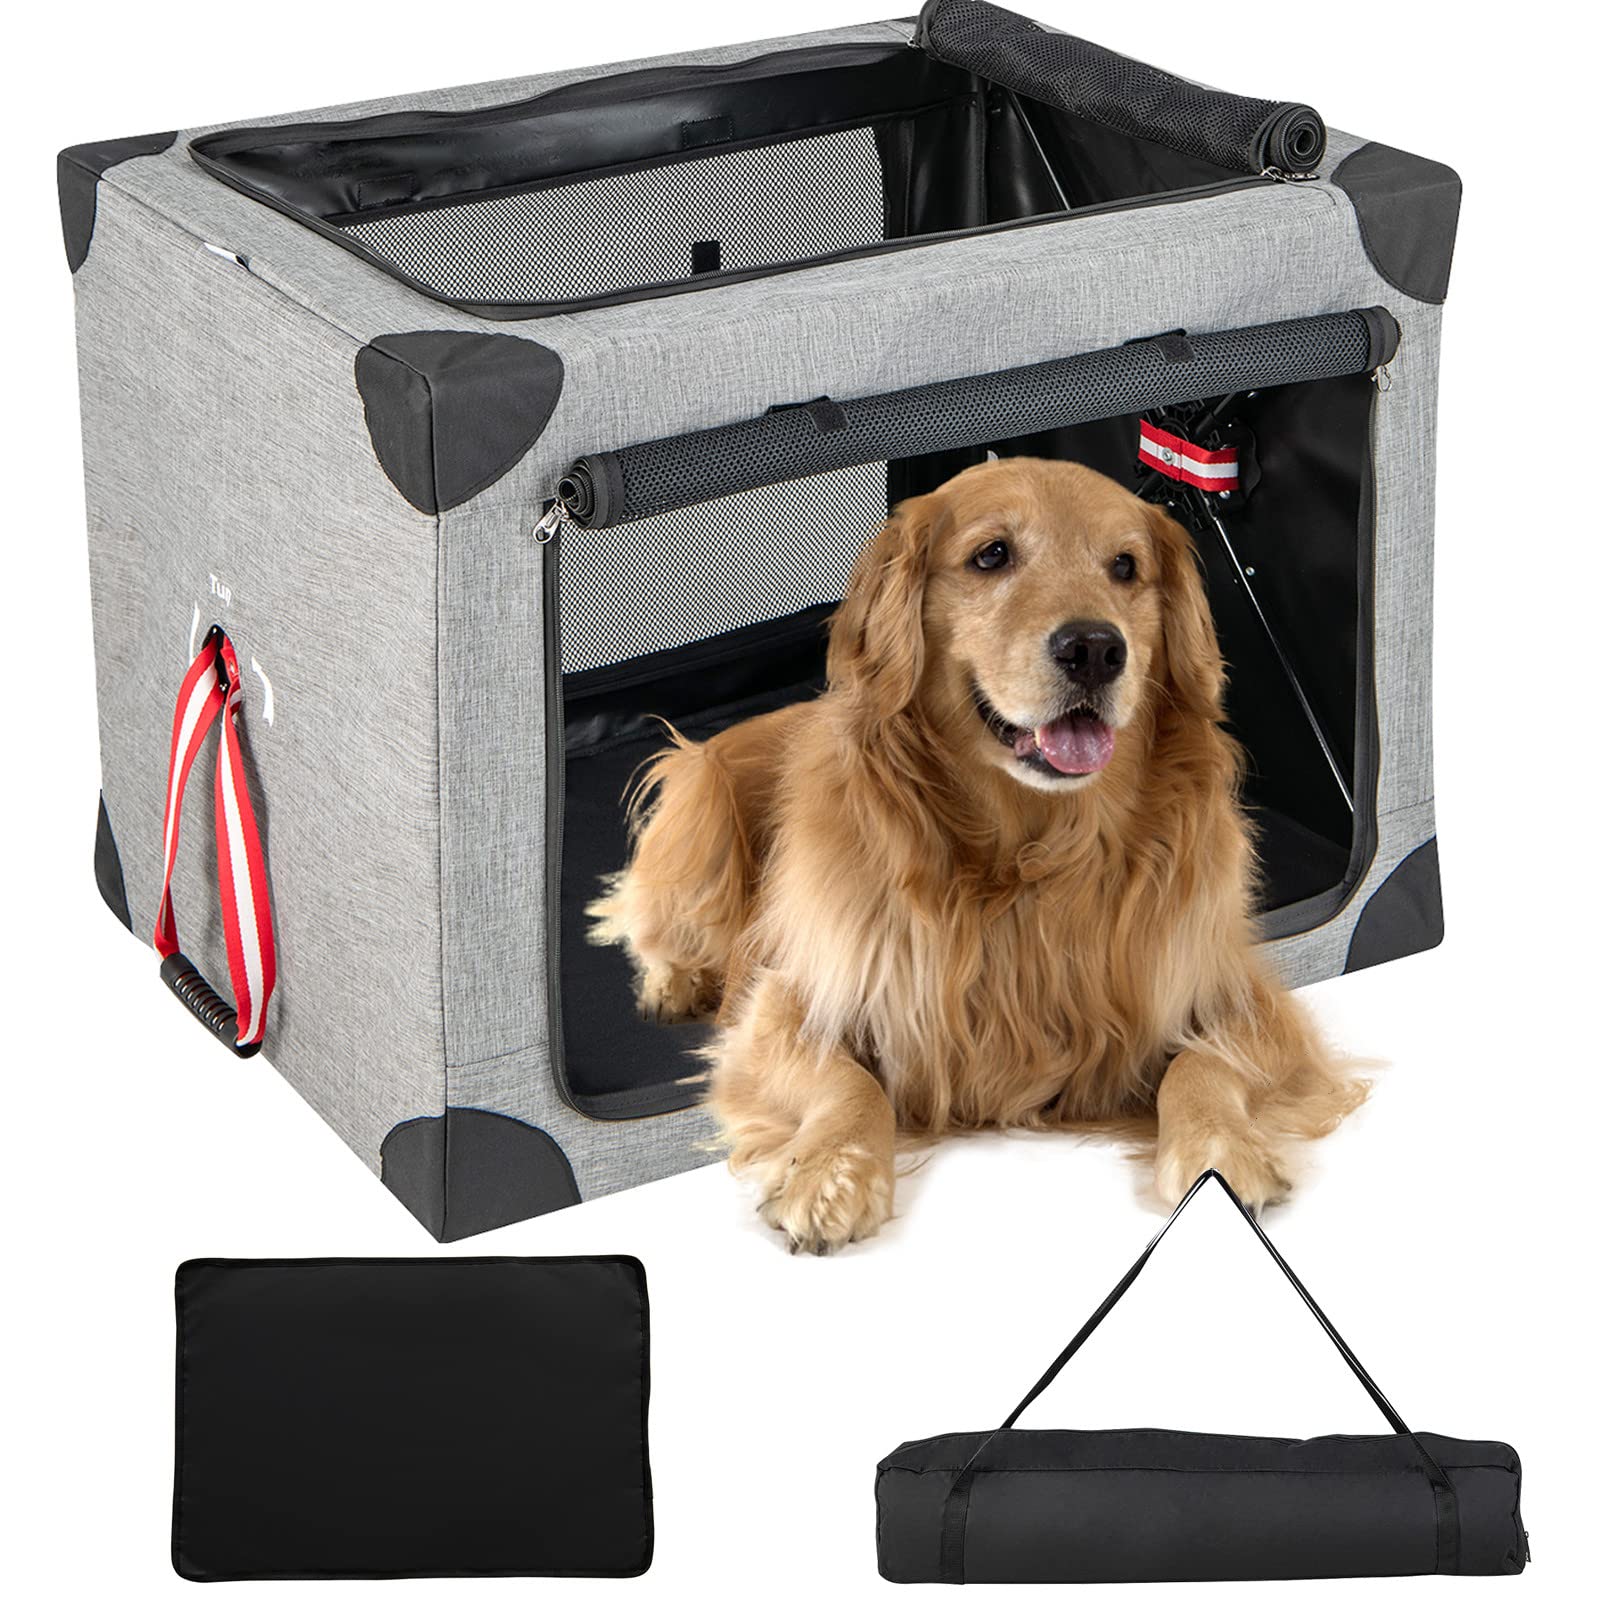 Giantex Folding Dog Soft Crate - Collapsible Pet Carry Case with 3 Mesh Doors, Extra Large: 37L x 26W x 26H